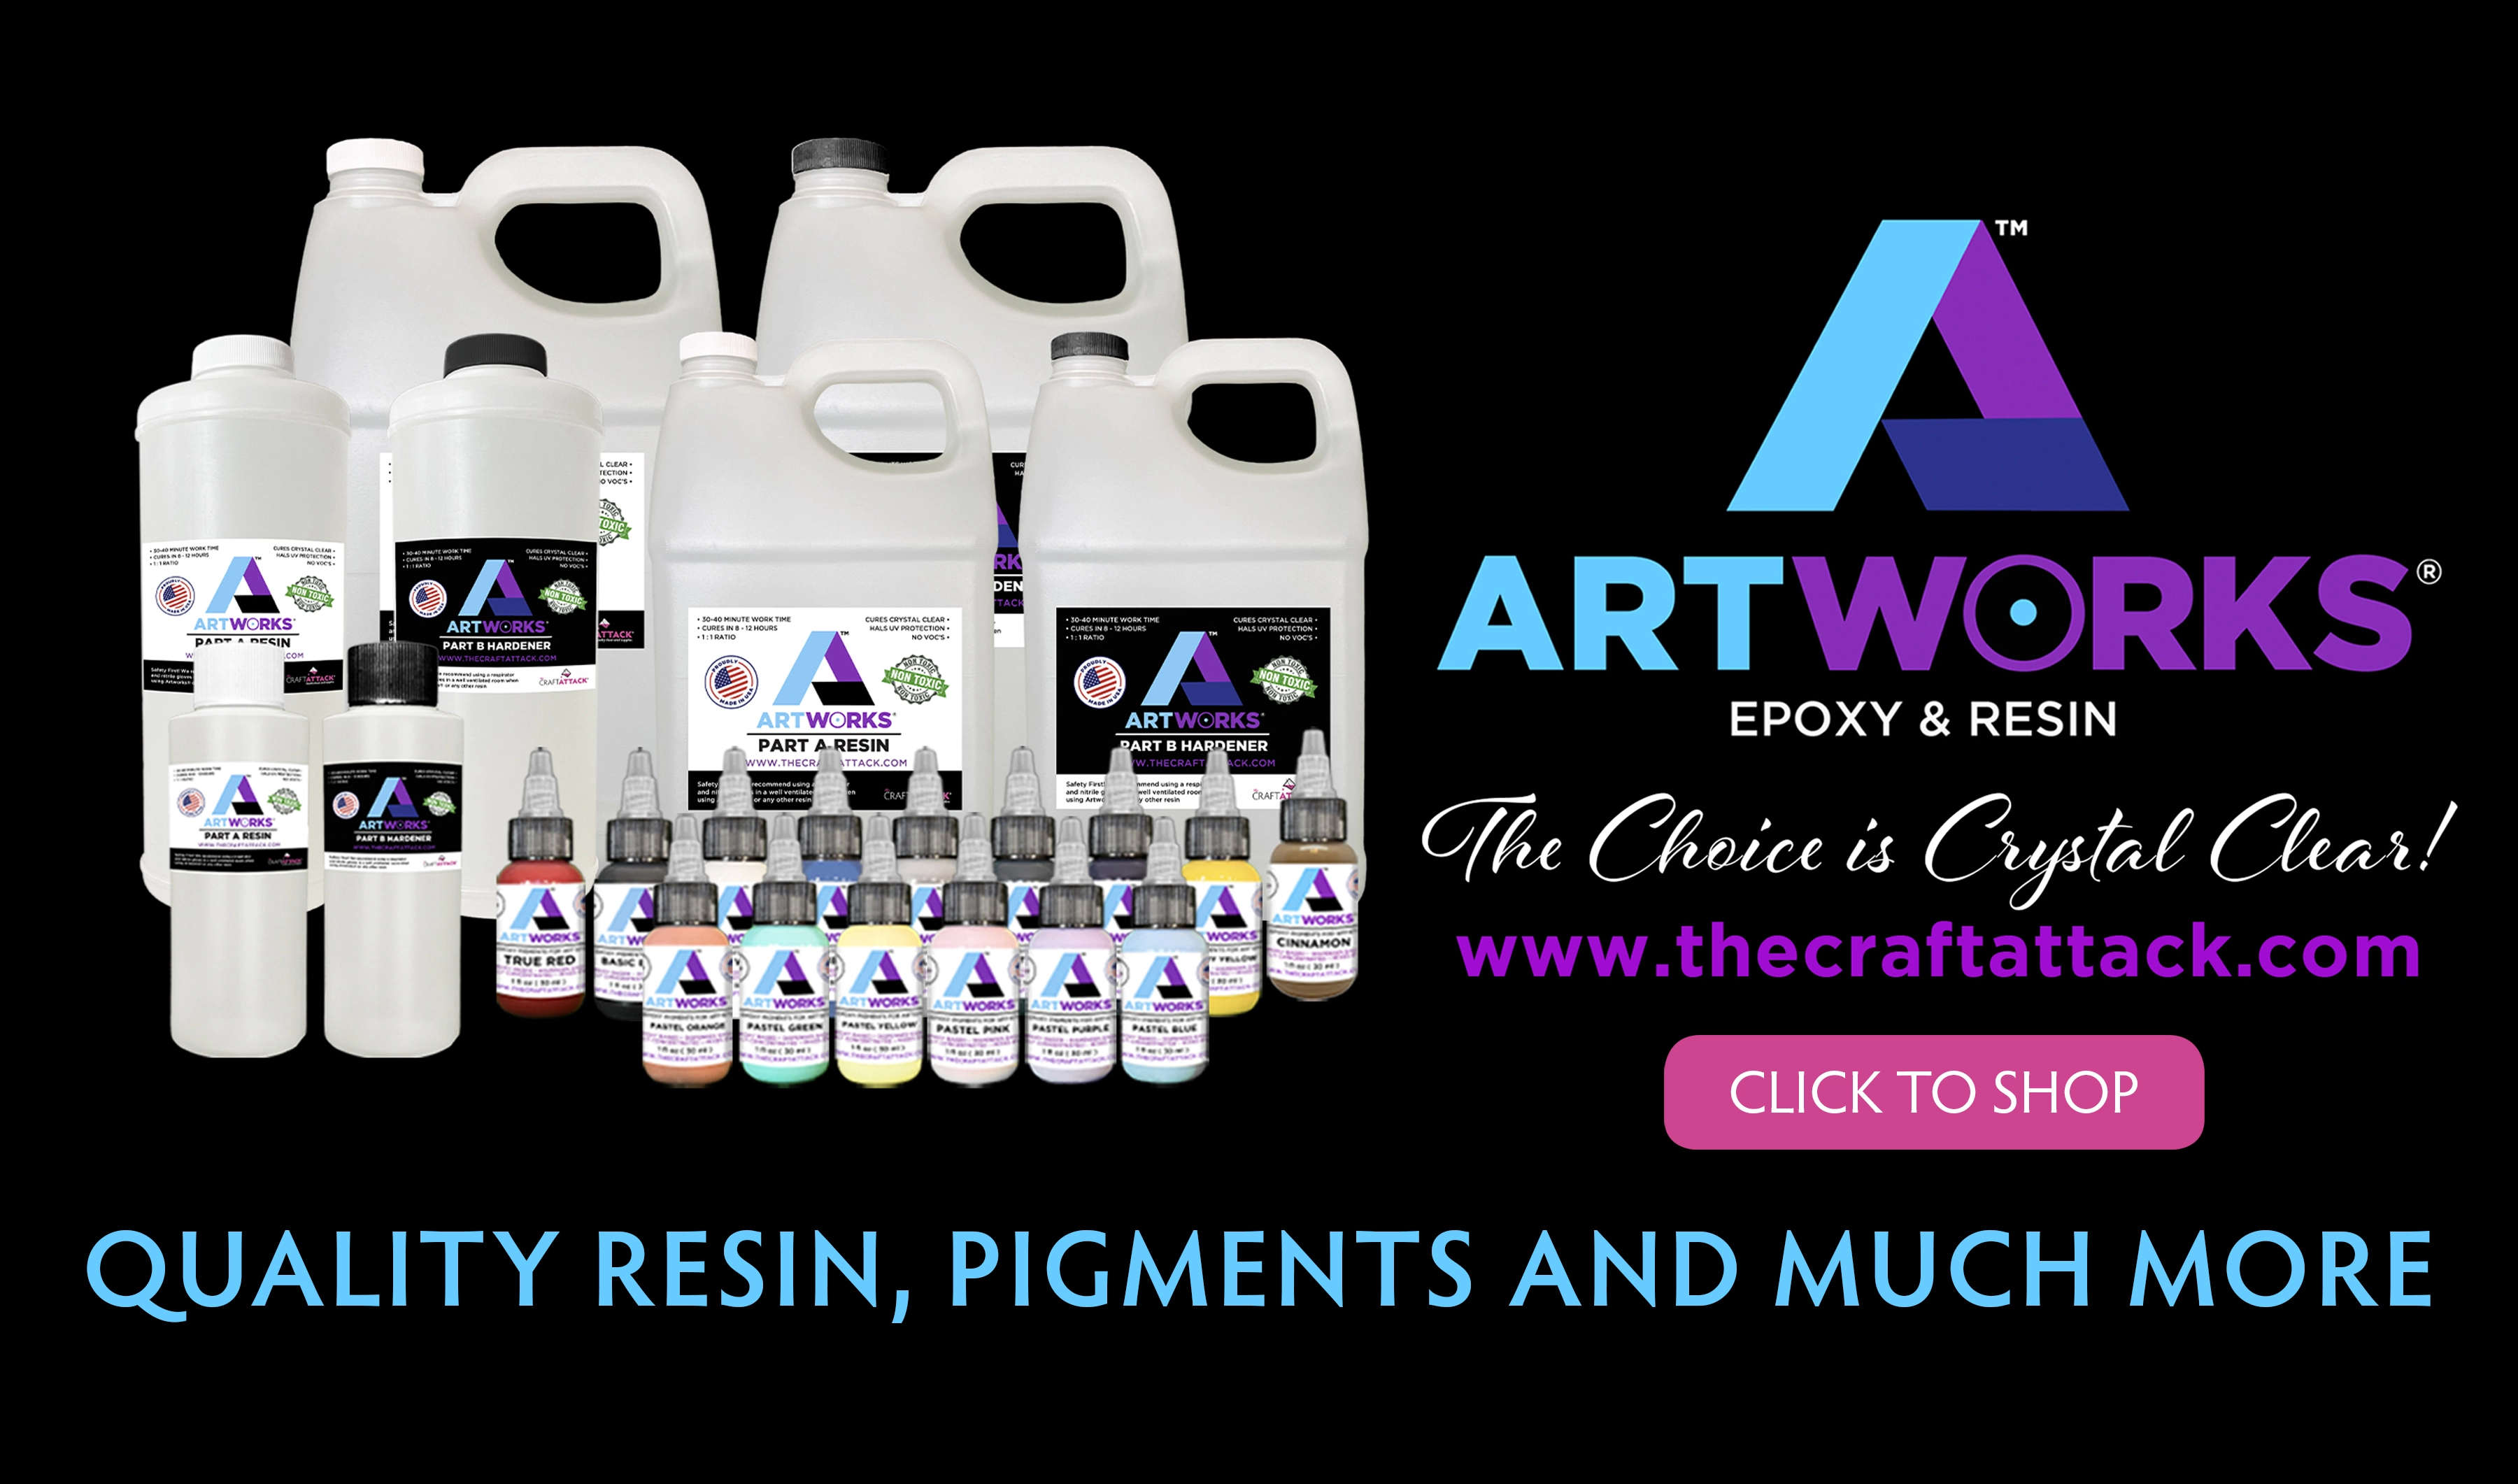 The Craft Attack Epoxy Resin Artworks Epoxy Resin Pigment Crafting UV Resin Scrubs for crafting resin art